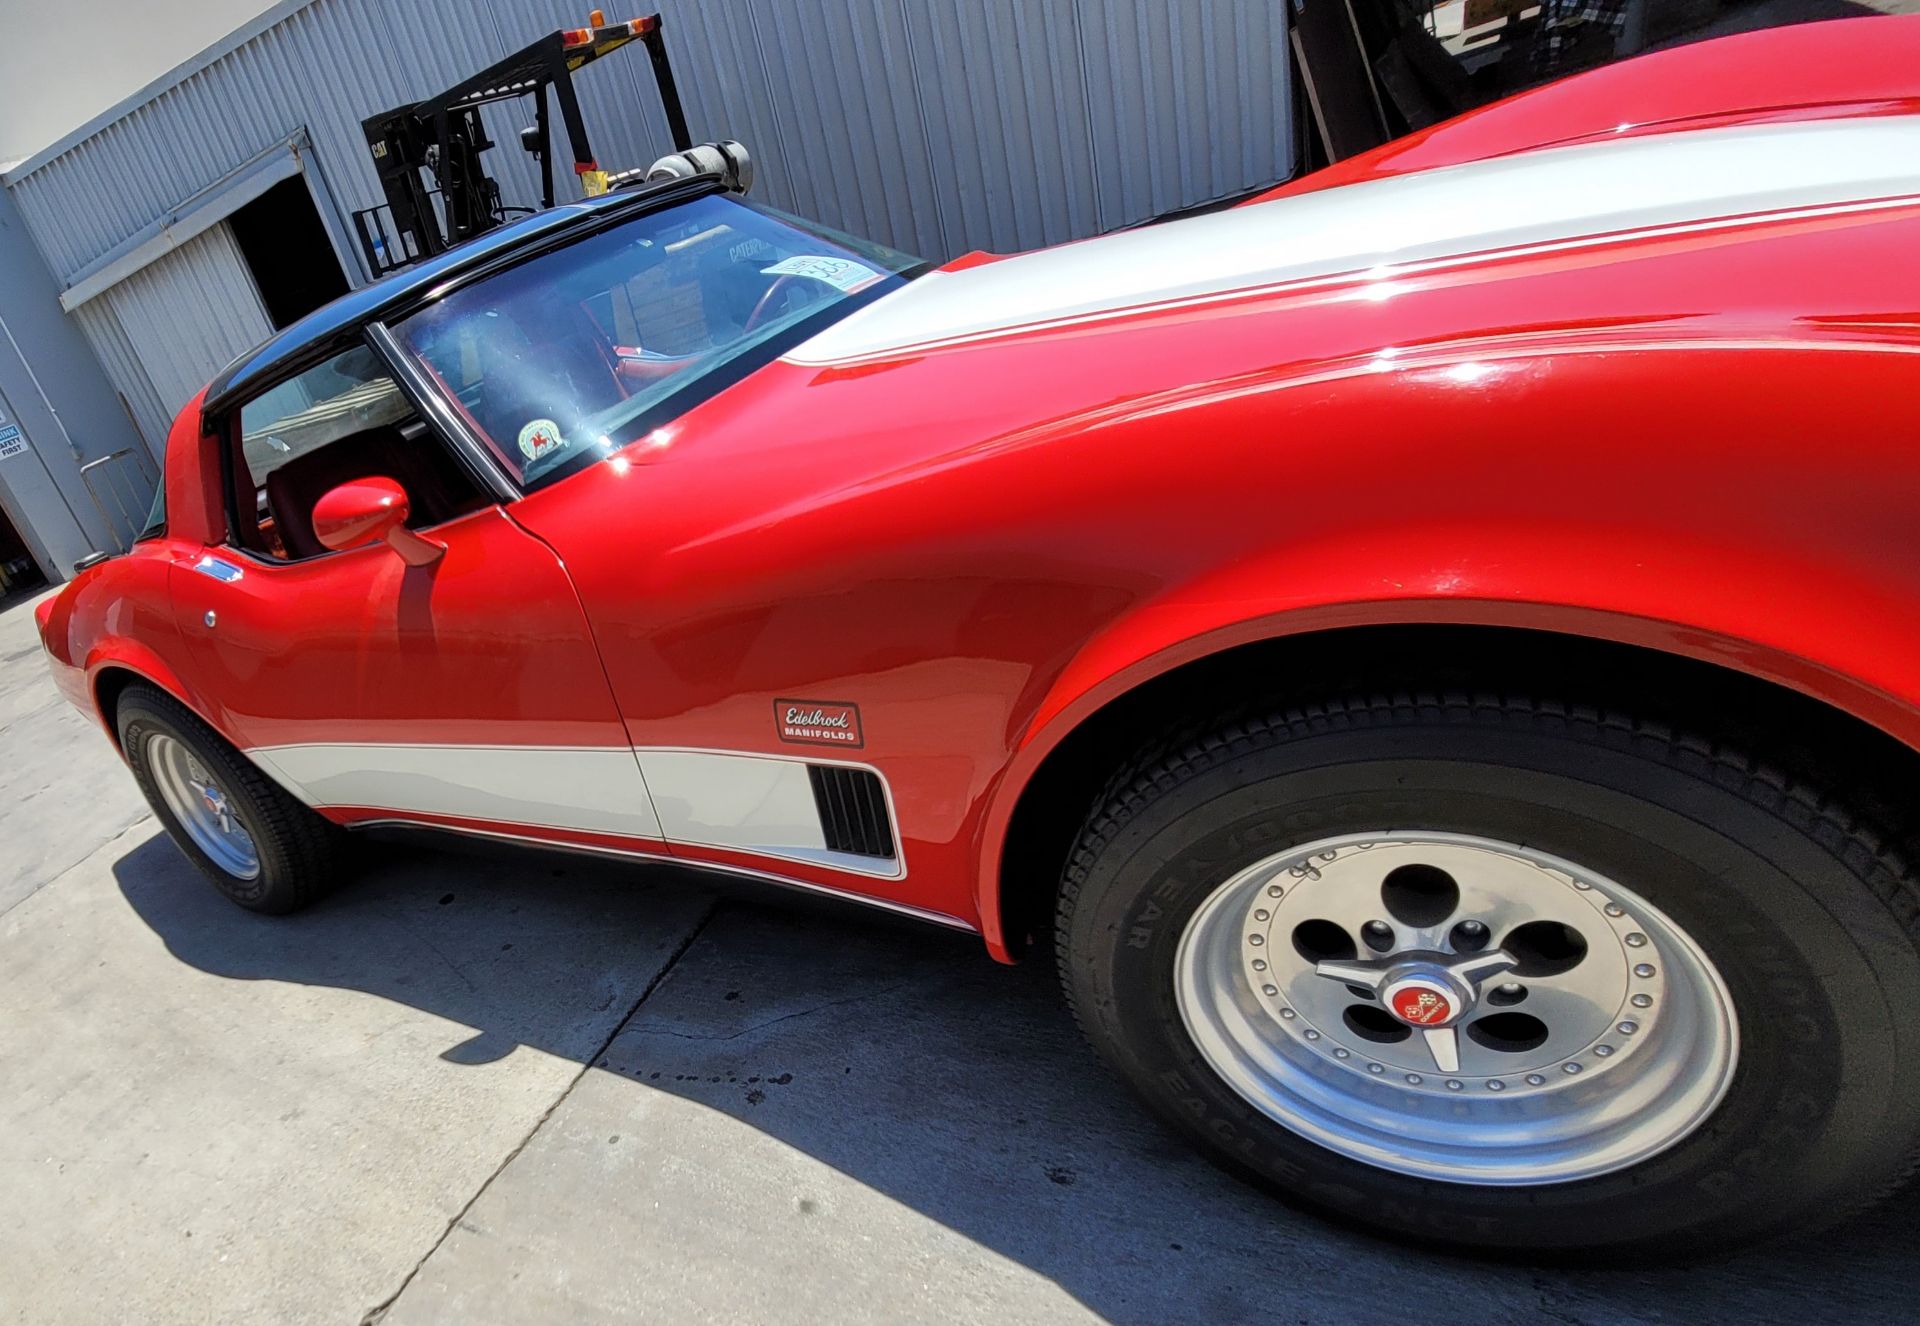 1980 CHEVROLET CORVETTE, WAS VIC EDELBROCK'S PERSONAL CAR BOUGHT FOR R&D, RED INTERIOR, TITLE ONLY. - Image 53 of 70